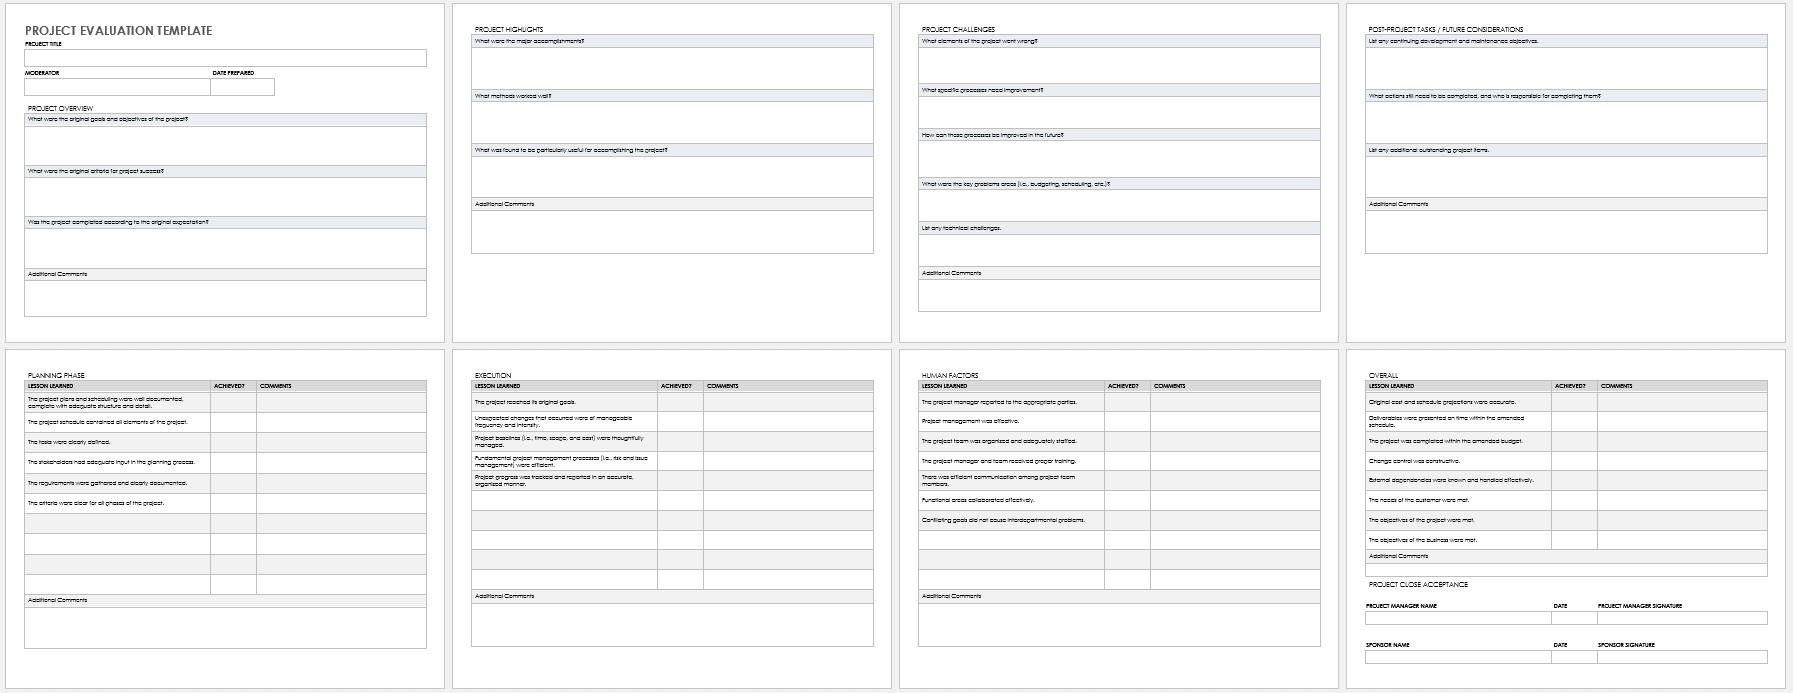 Project Evaluation Template